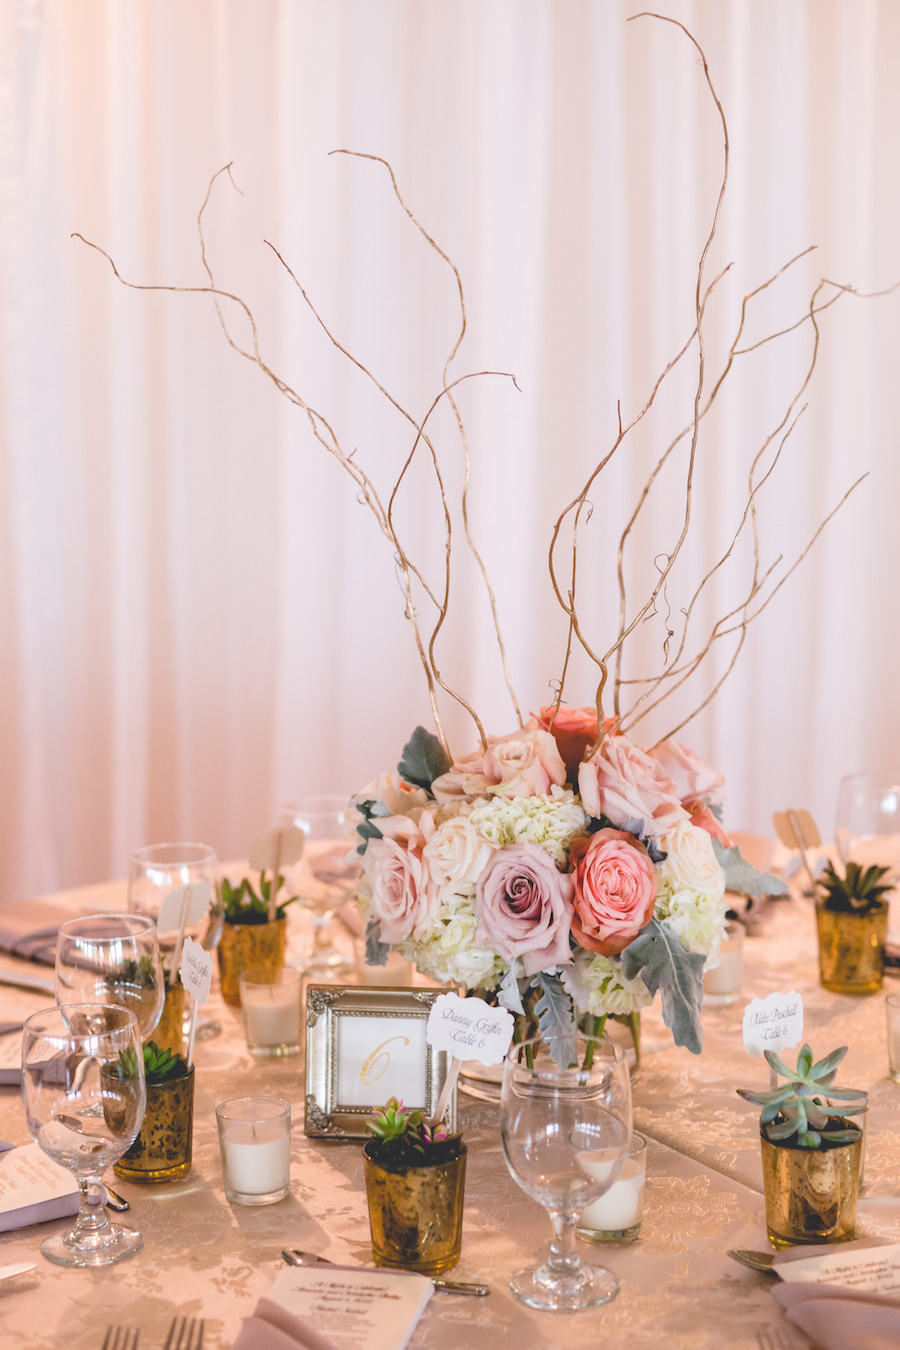 Wedding Reception Table Decor with Pink and Ivory Floral Centerpieces with Wooden Twig, Branch Accents and Small Succulents | St. Petersburg Wedding Planner Special Moments